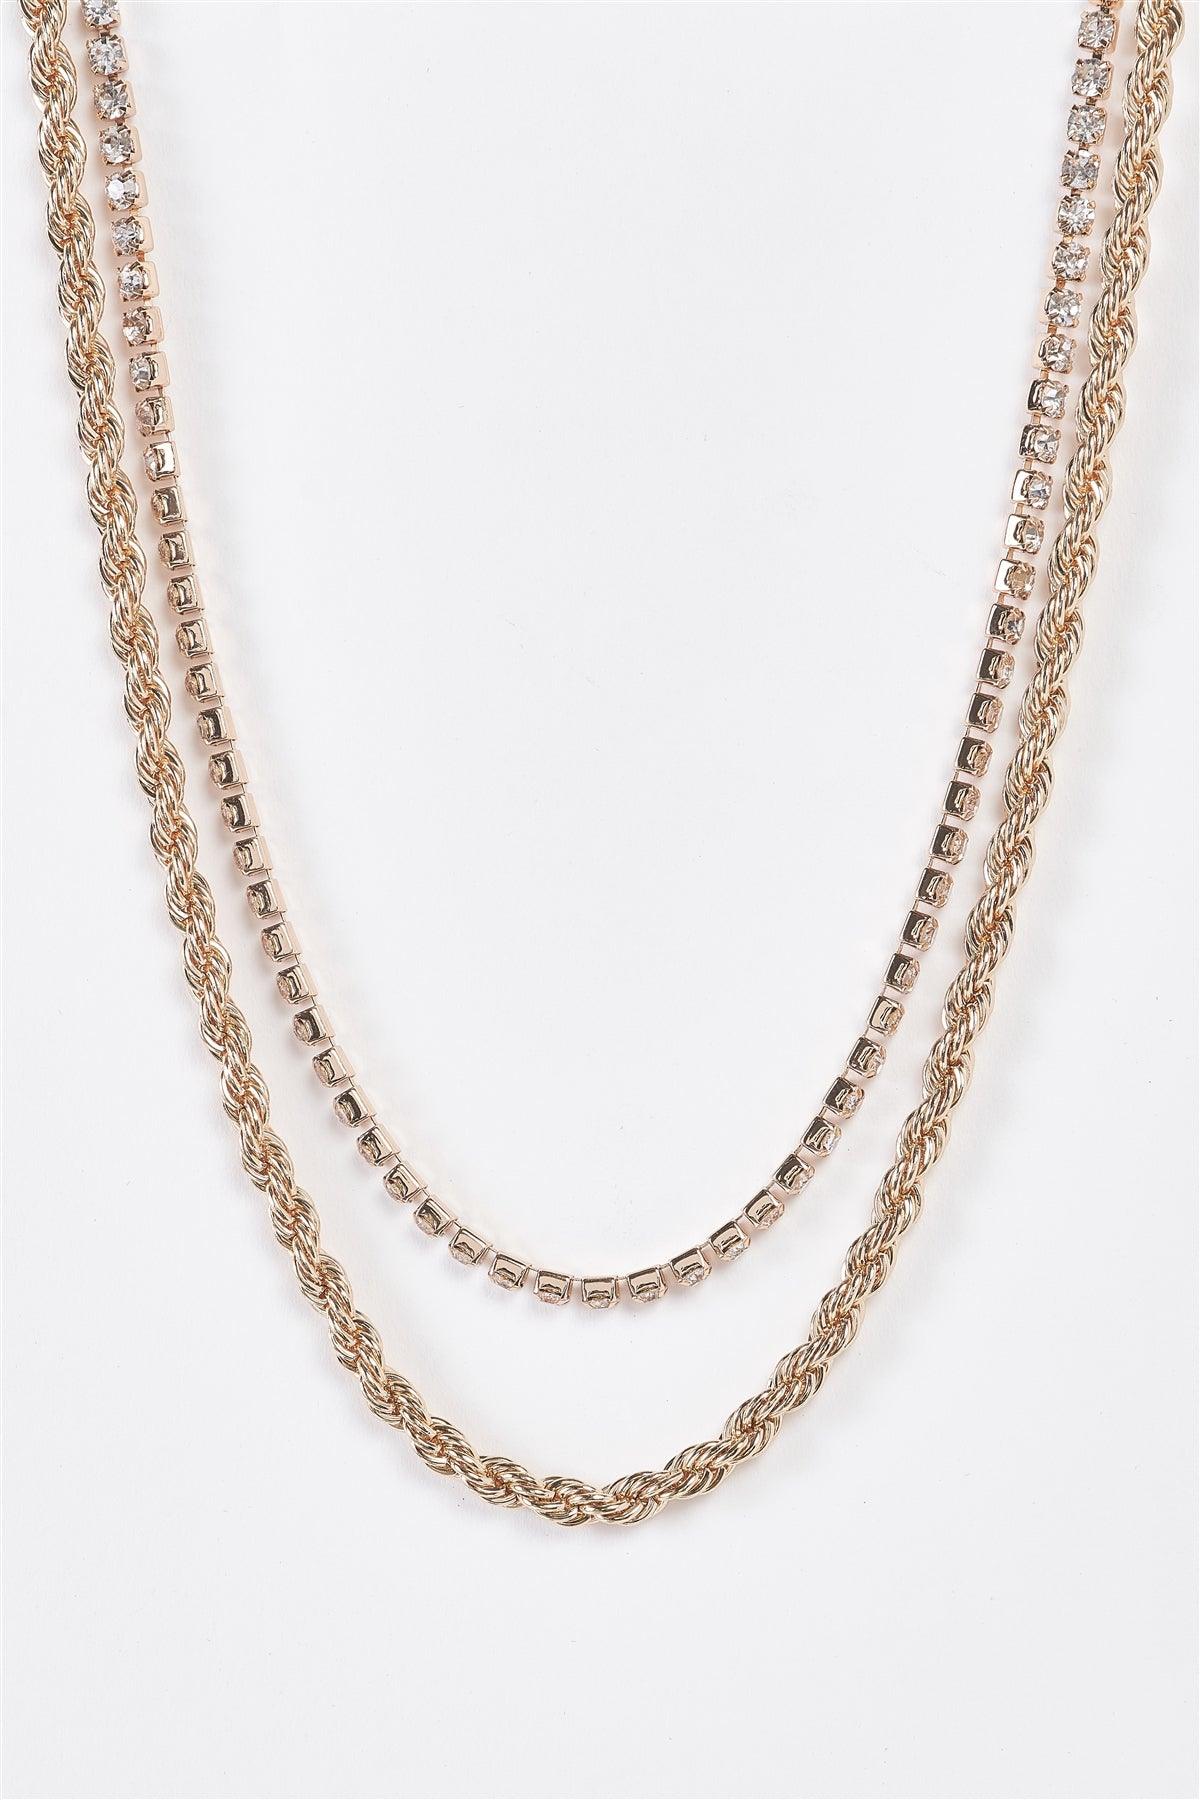 Gold Rope Chain & Rhinestone Double-Chain Necklace /3 Pieces